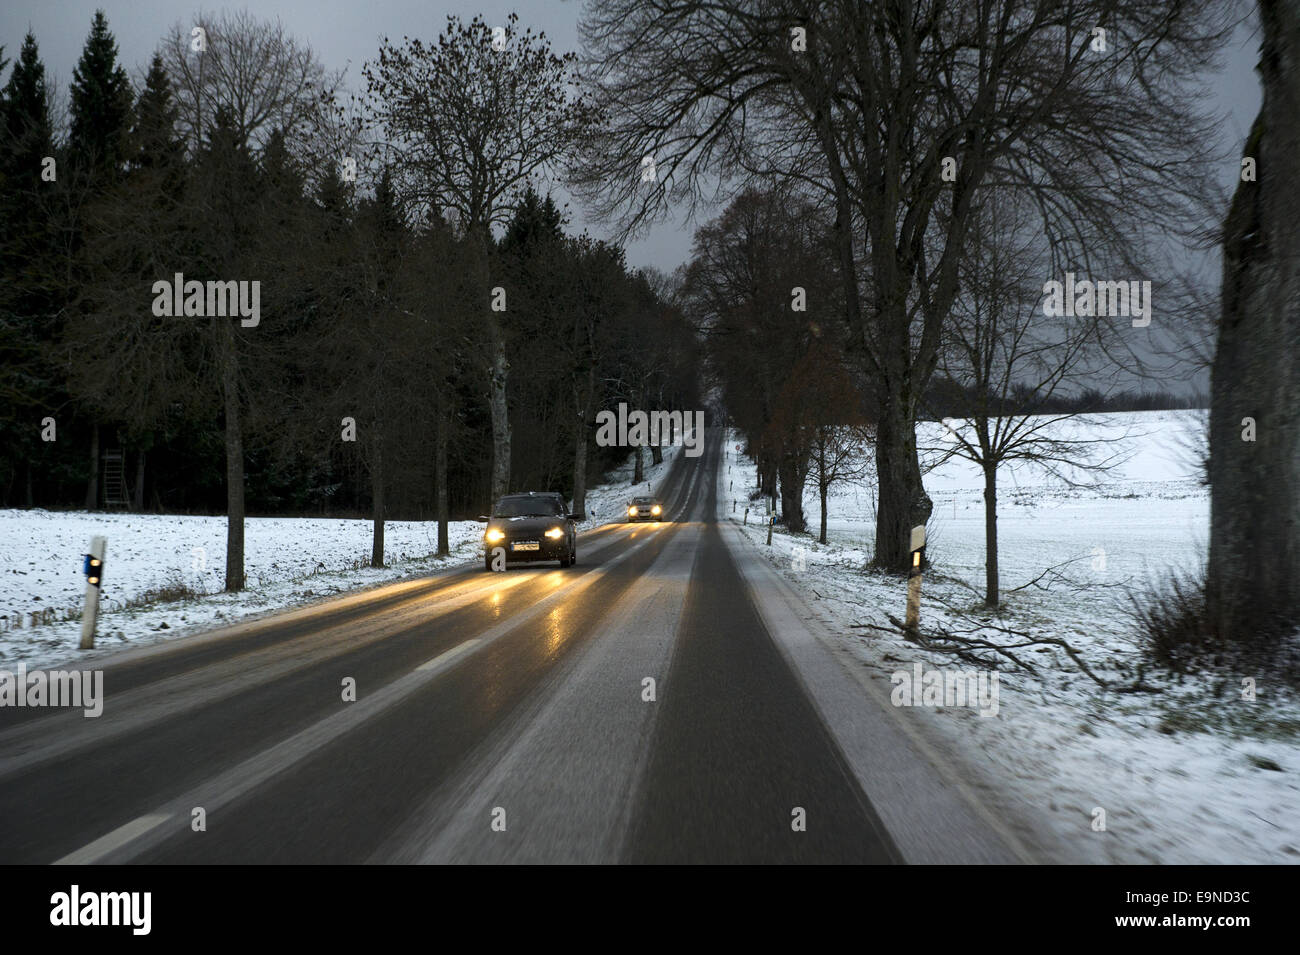 Wintry road conditions Stock Photo